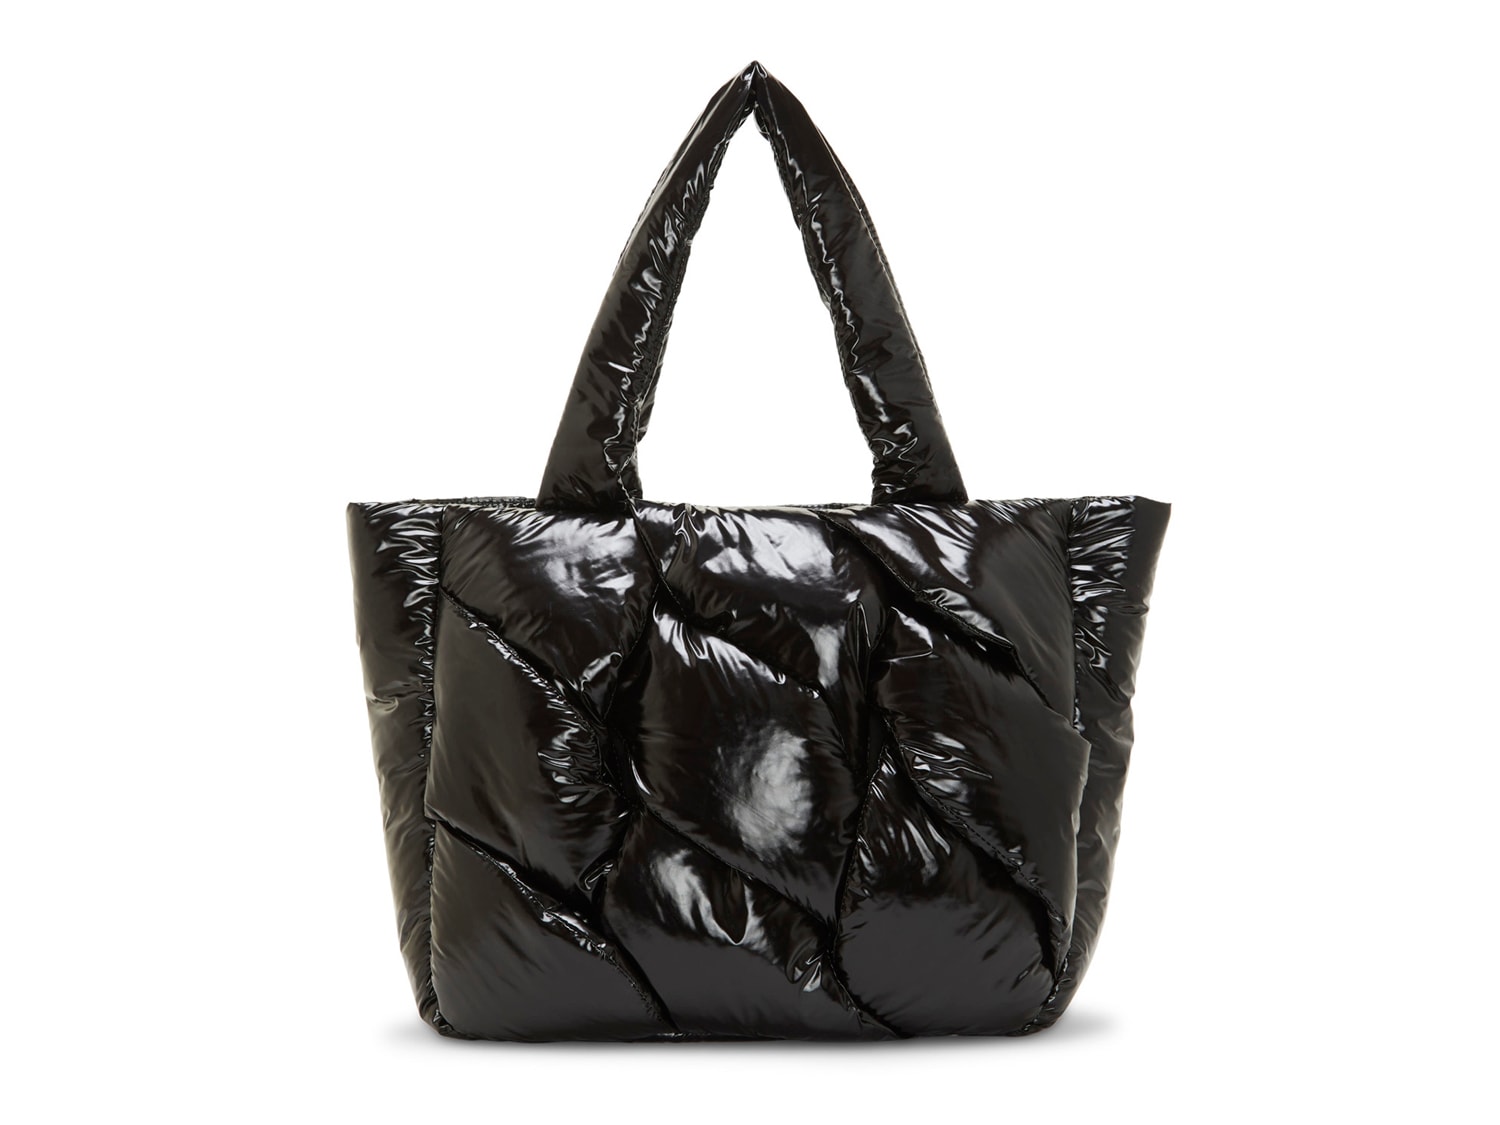 Vince Camuto Dayah Tote - Free Shipping | DSW